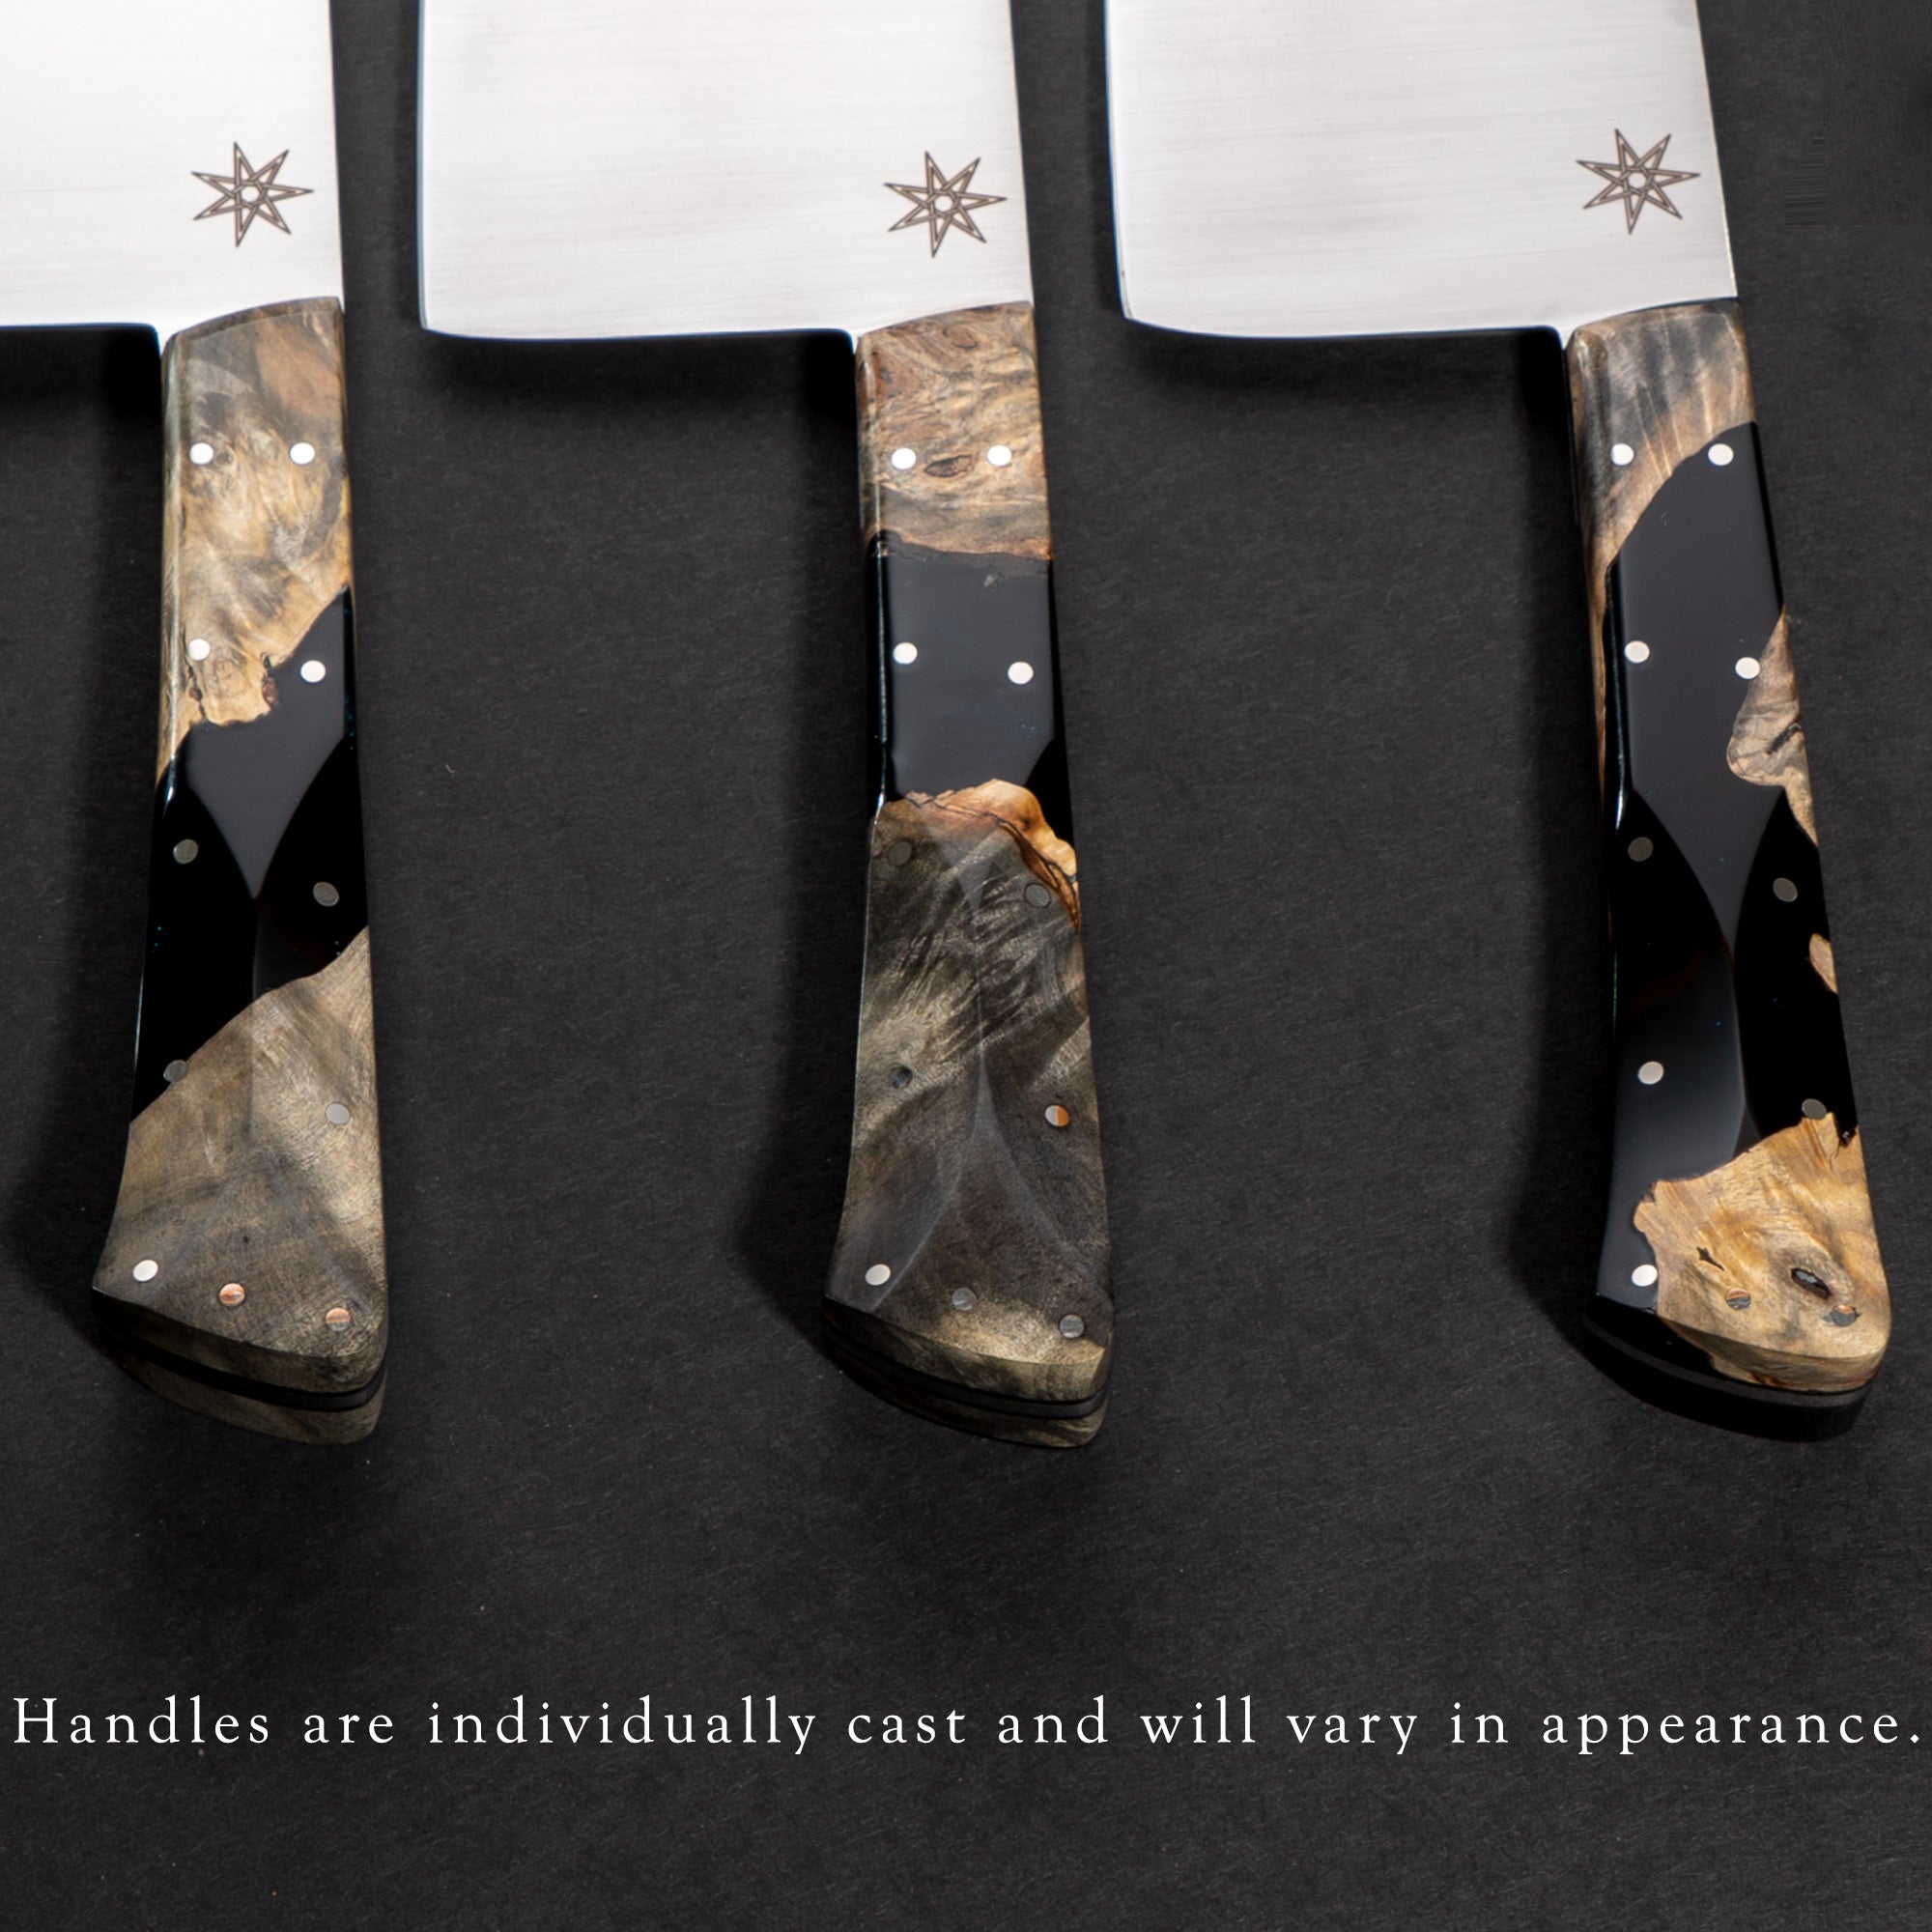 Desert Dawn handles are individually cast and will vary in appearance. Buckeye Burl and midnight black resin.